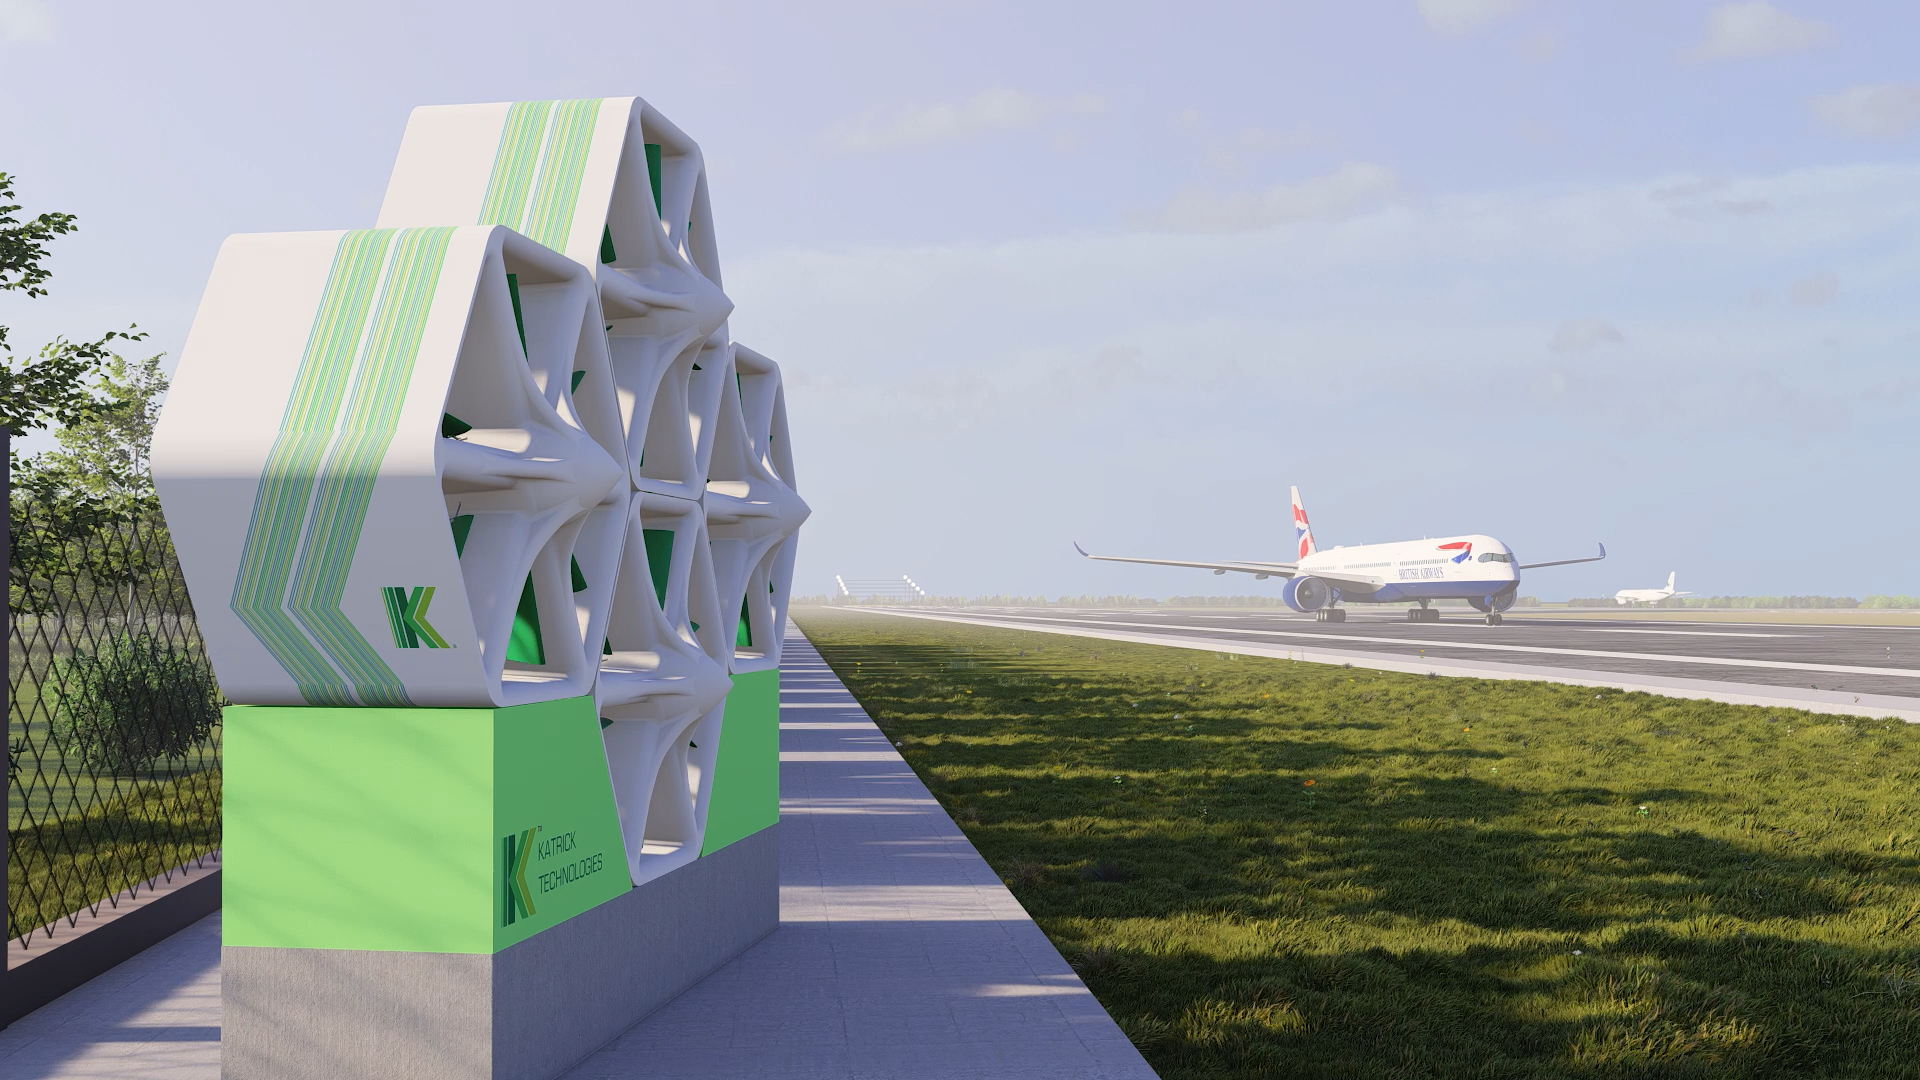 Edinburgh Airport explores potential for untapped wind energy